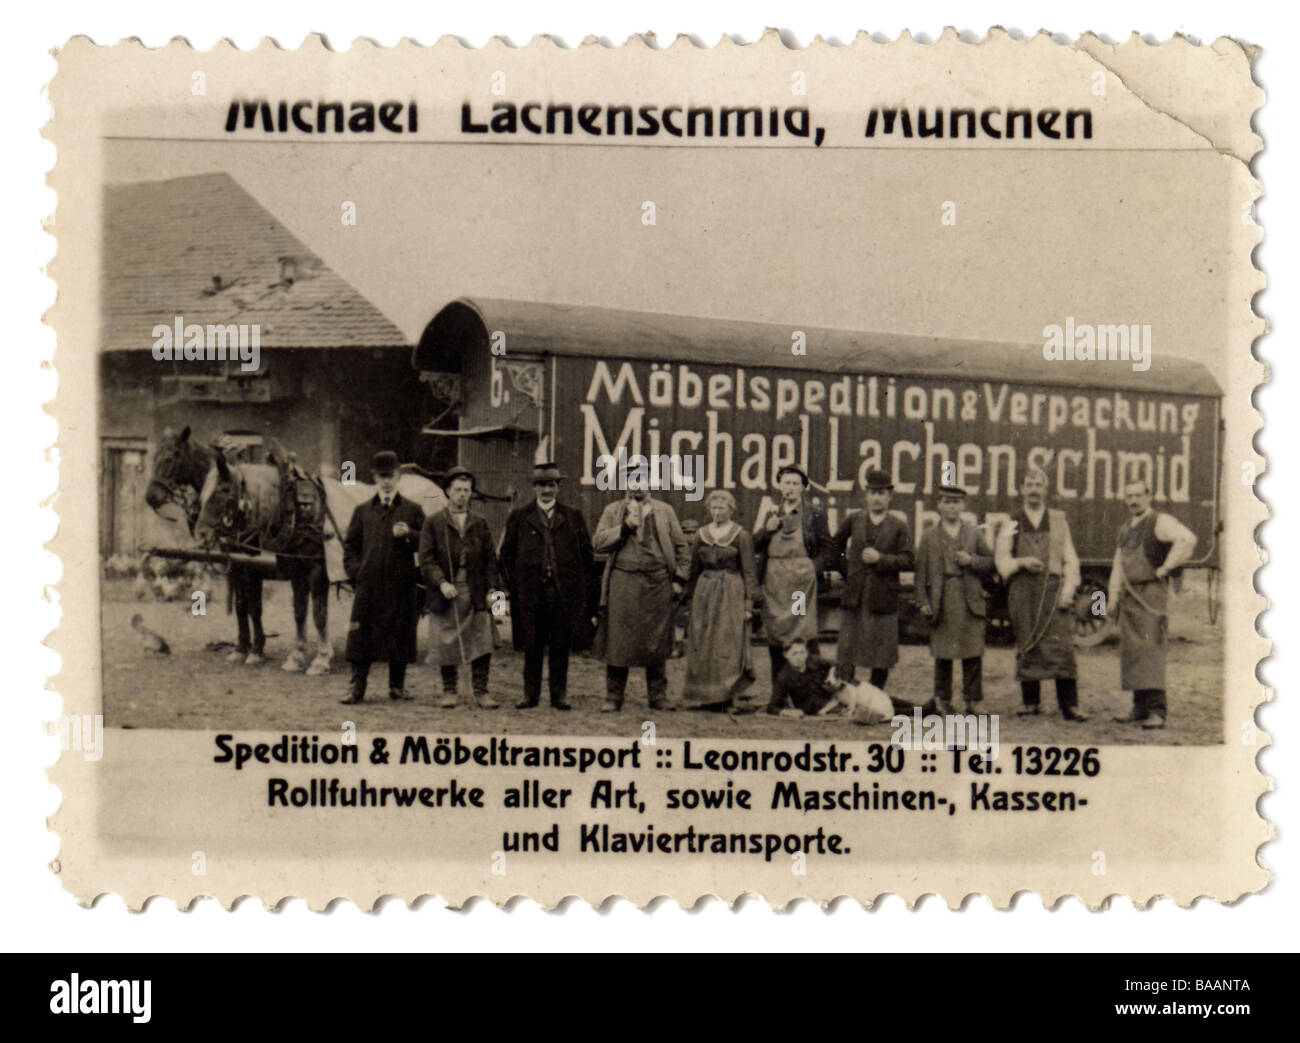 advertising, stamps, removal spedition Michael Lachenschmid Company, Munich, Germany, circa 1910, Stock Photo